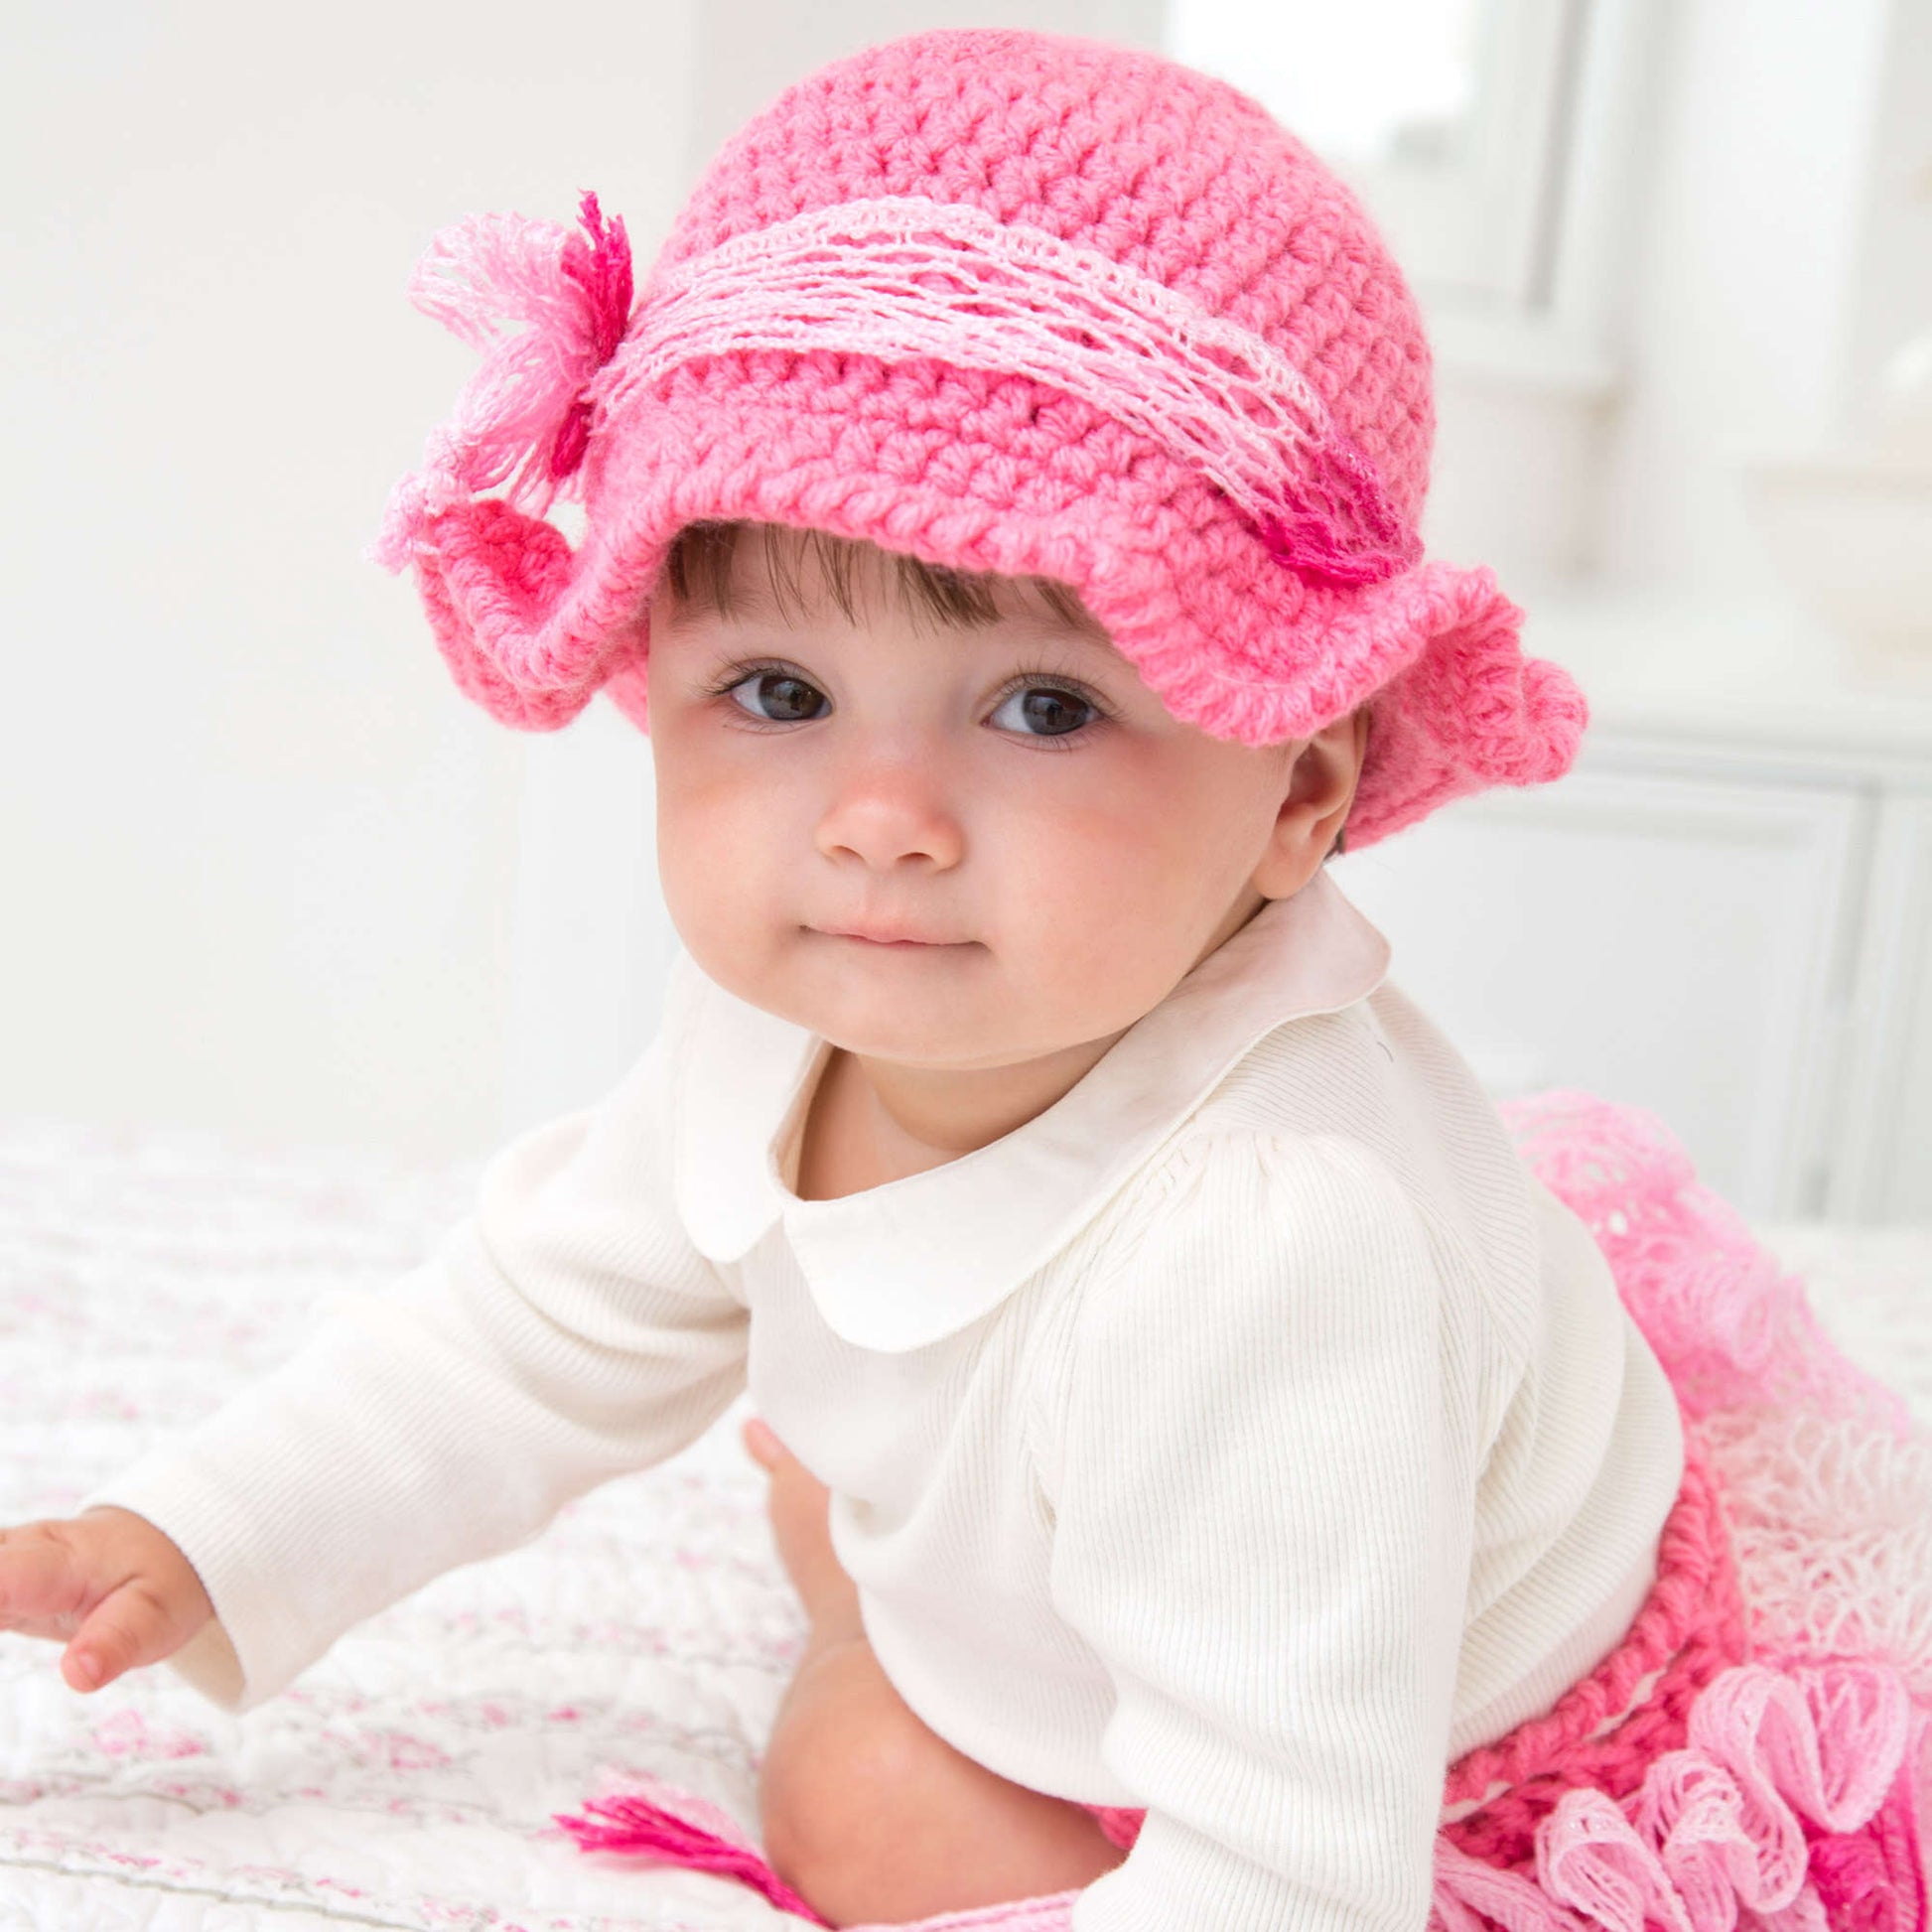 Free Red Crochet Heart Country Baby Diaper Cover & Hat Pattern